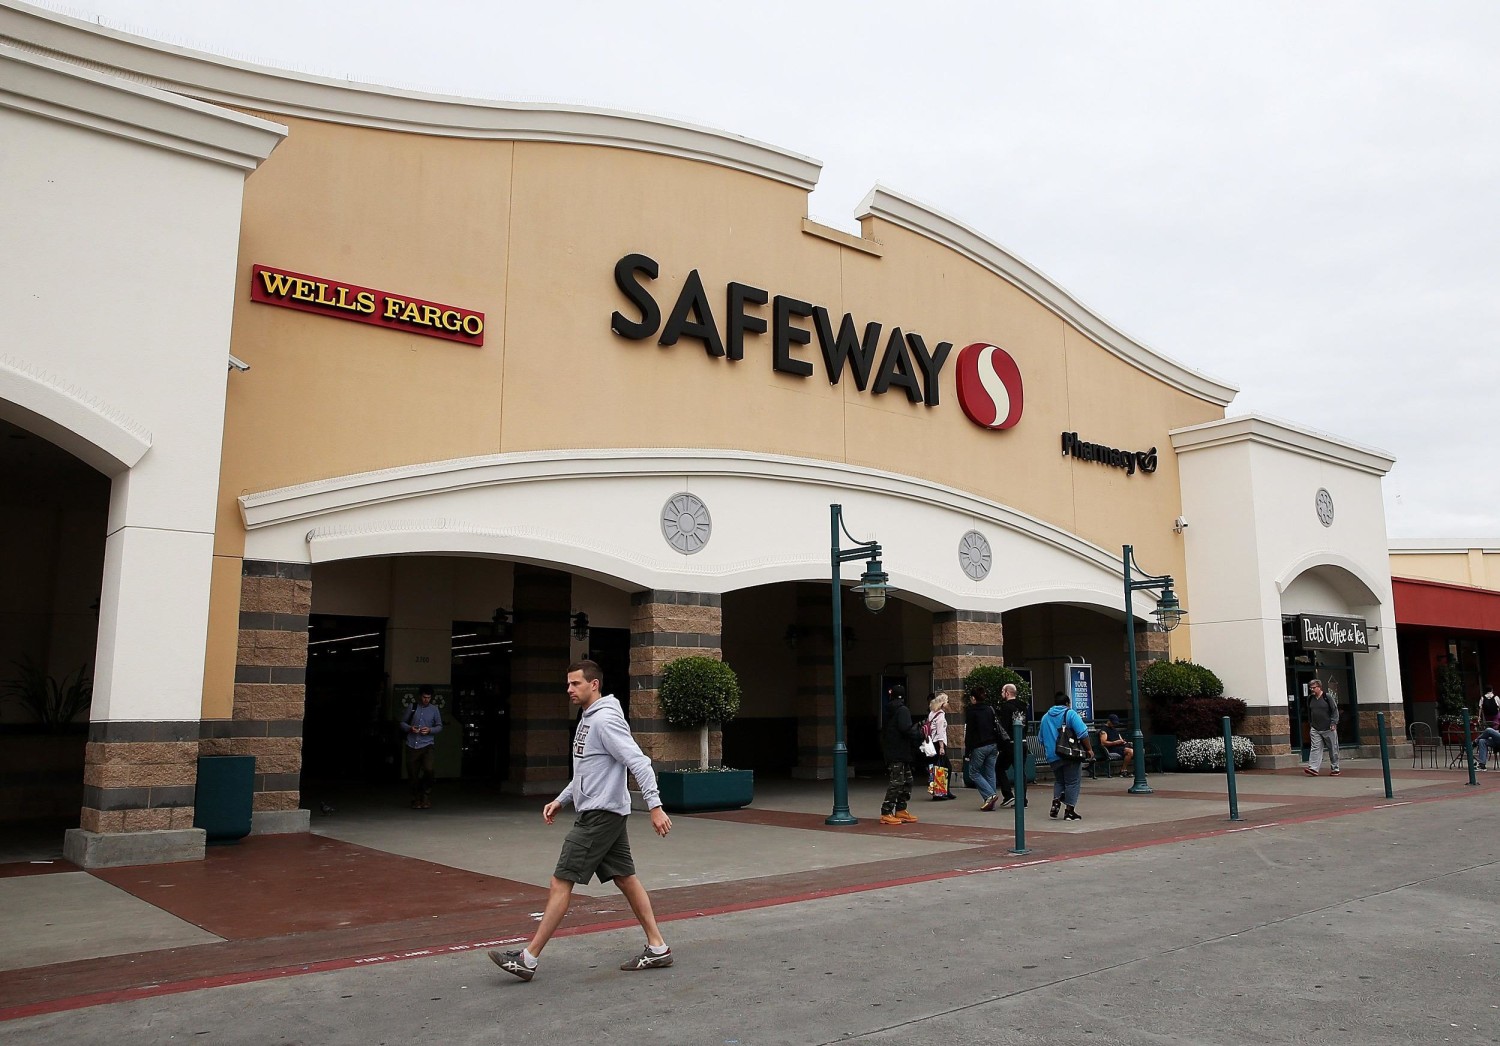 Albertsons Owner To Buy Safeway For More Than 9 Billion